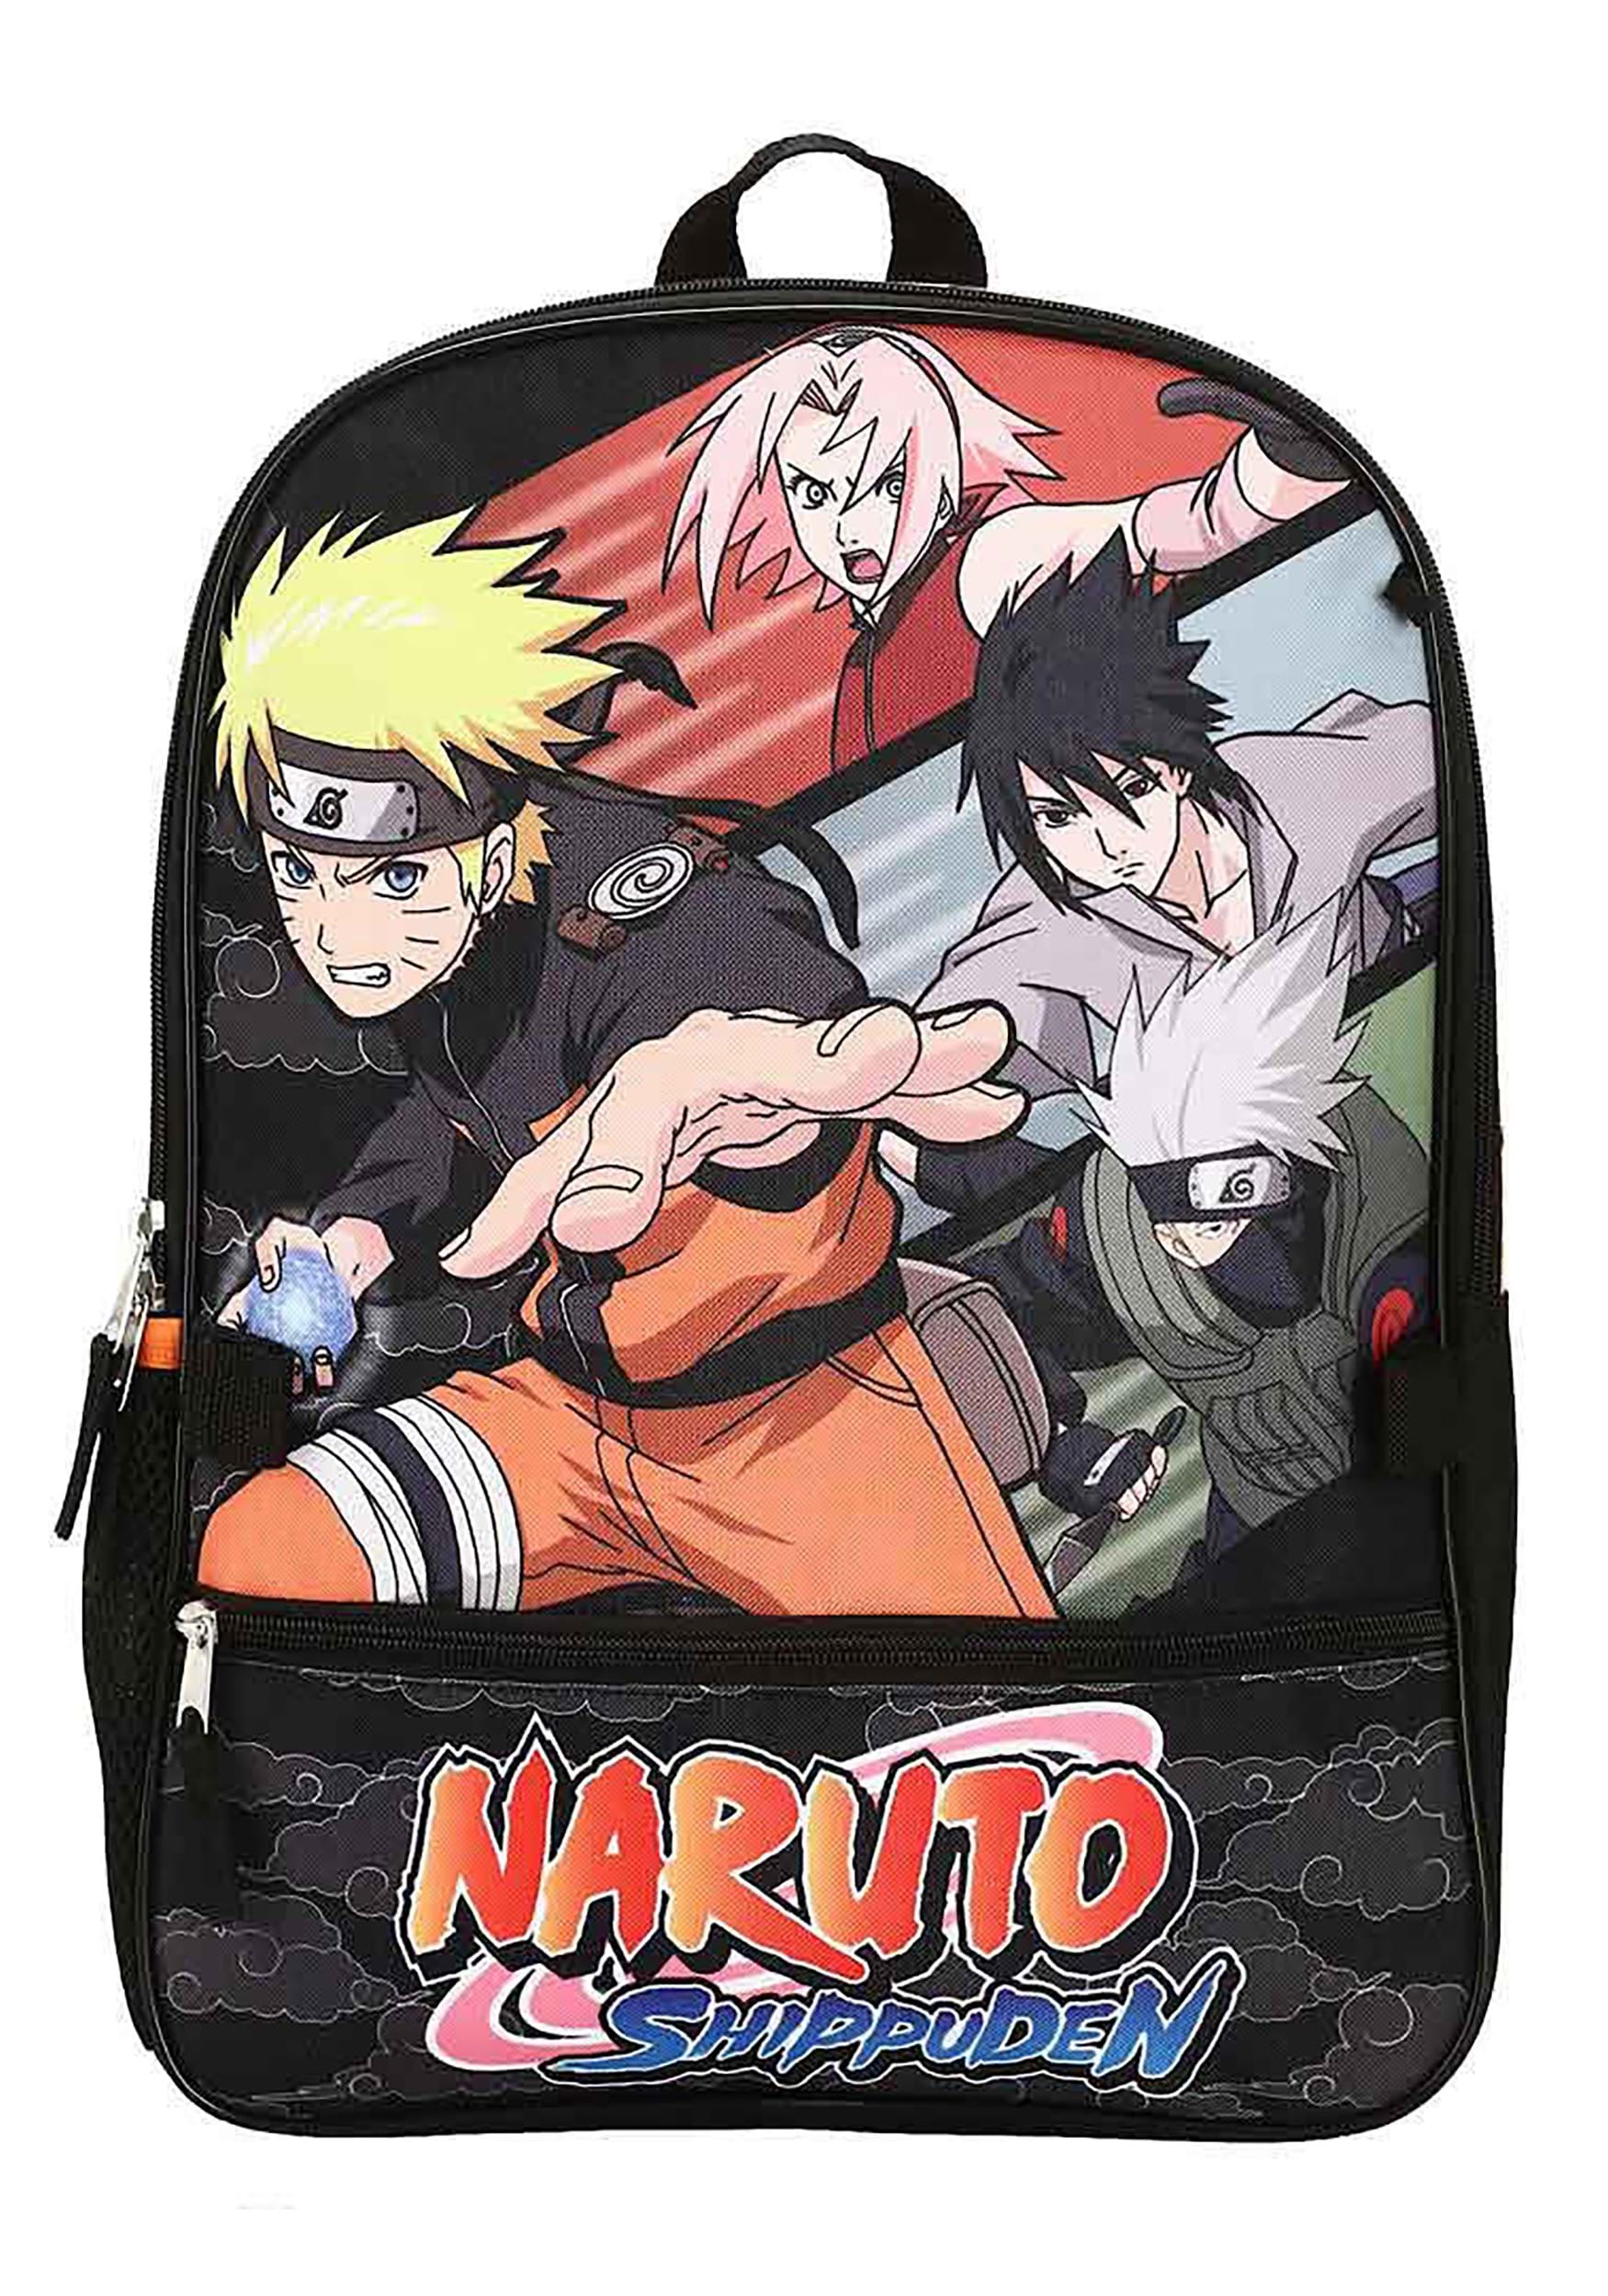 https://images.fun.com/products/86676/2-1-238554/naruto-characters-5-piece-backpack-set-alt-2.jpg